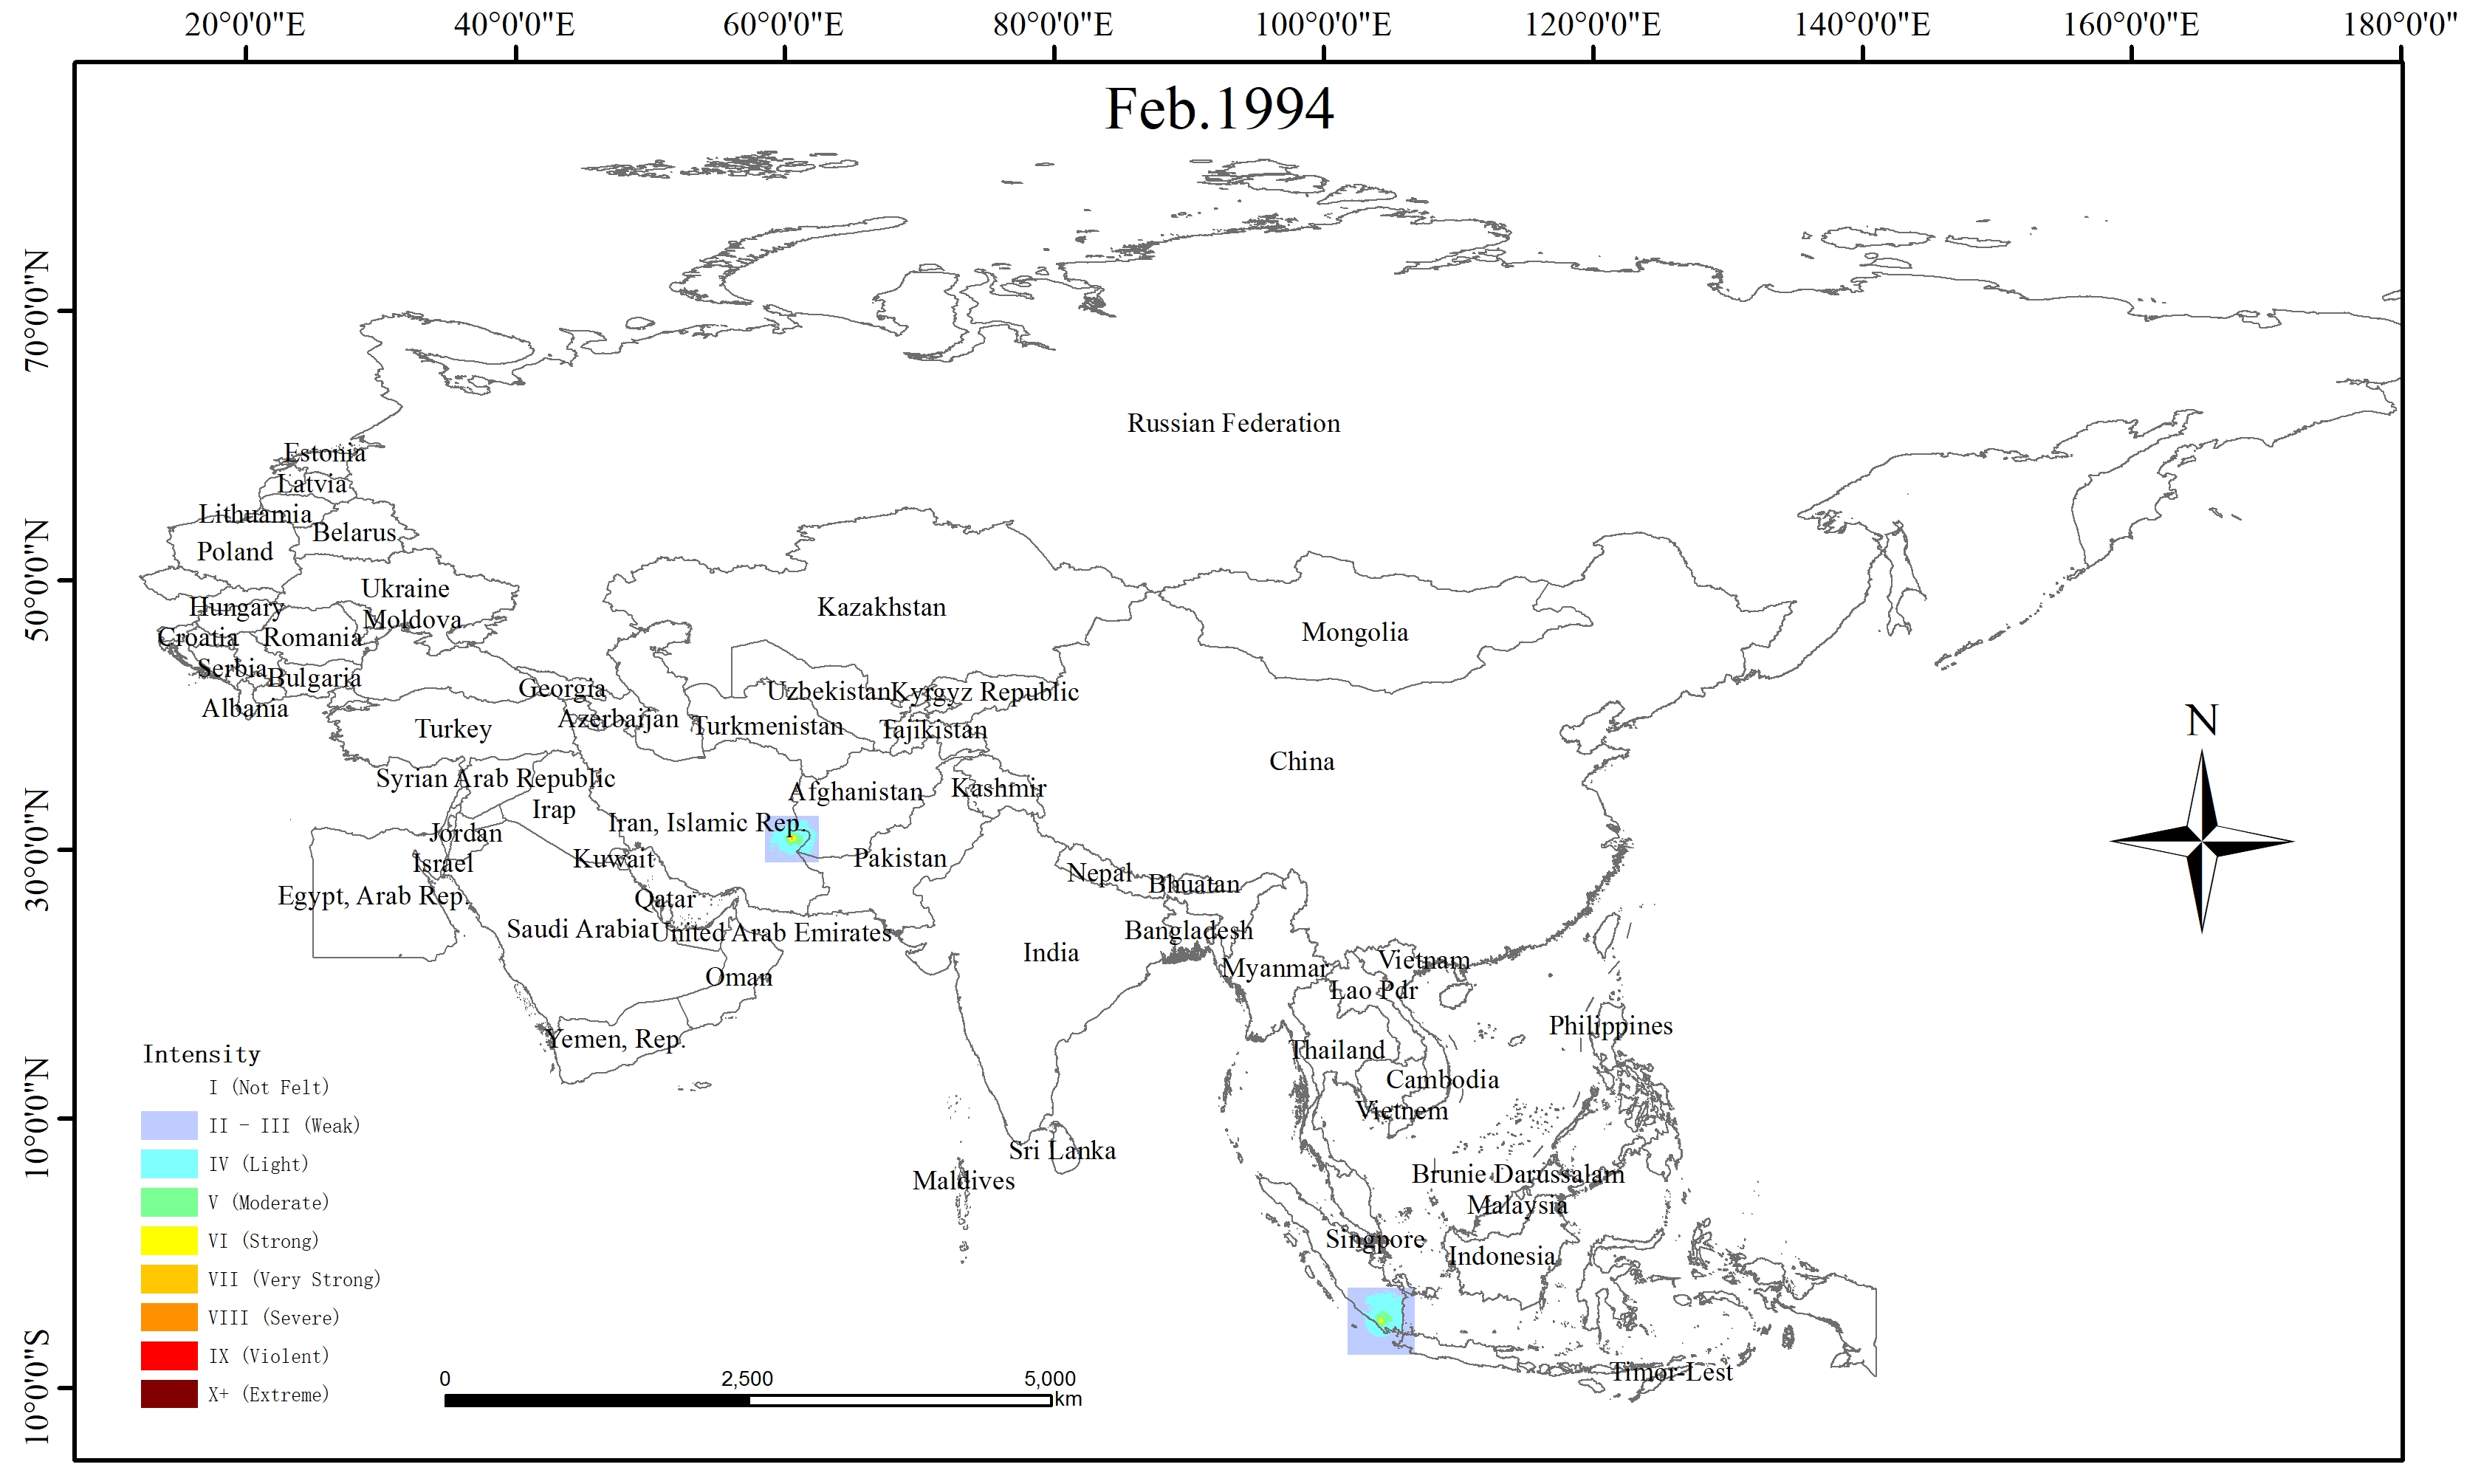 Spatio-temporal Distribution of Earthquake Disaster in the Belt and Road Area in 1994